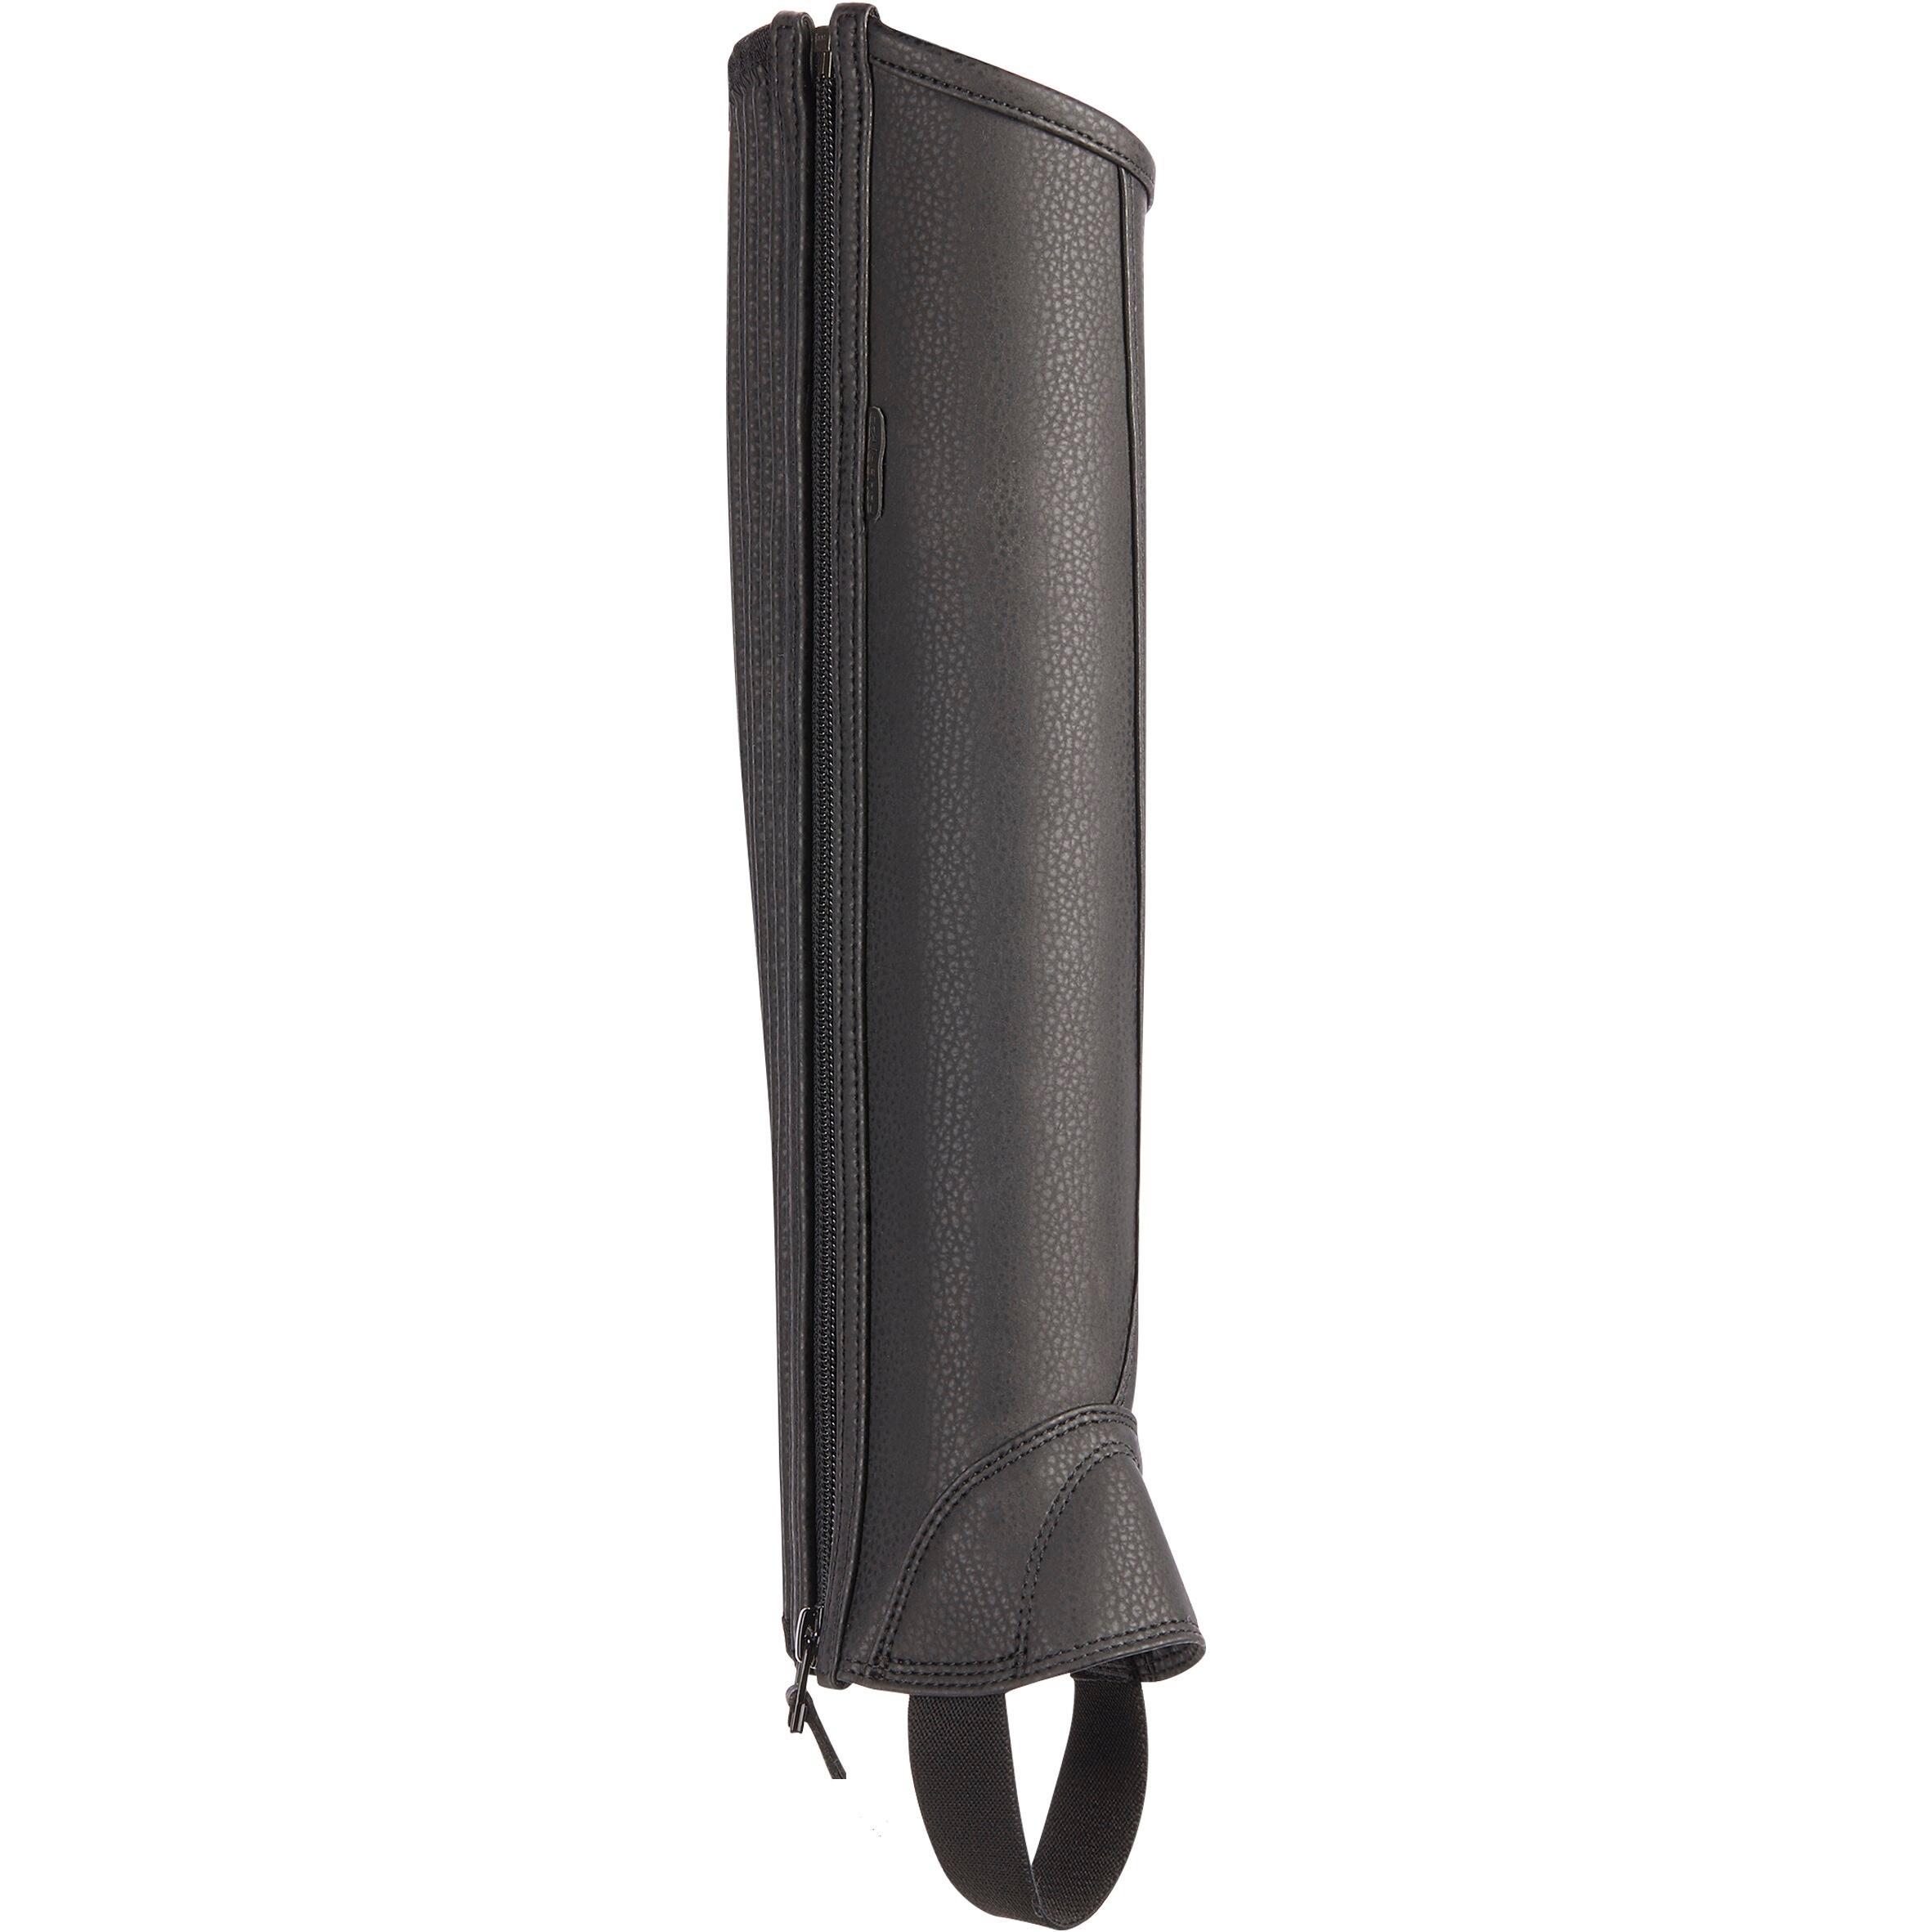 Kids' Horse Riding Leather Half-Chaps With Gusset 500 - Black 1/8